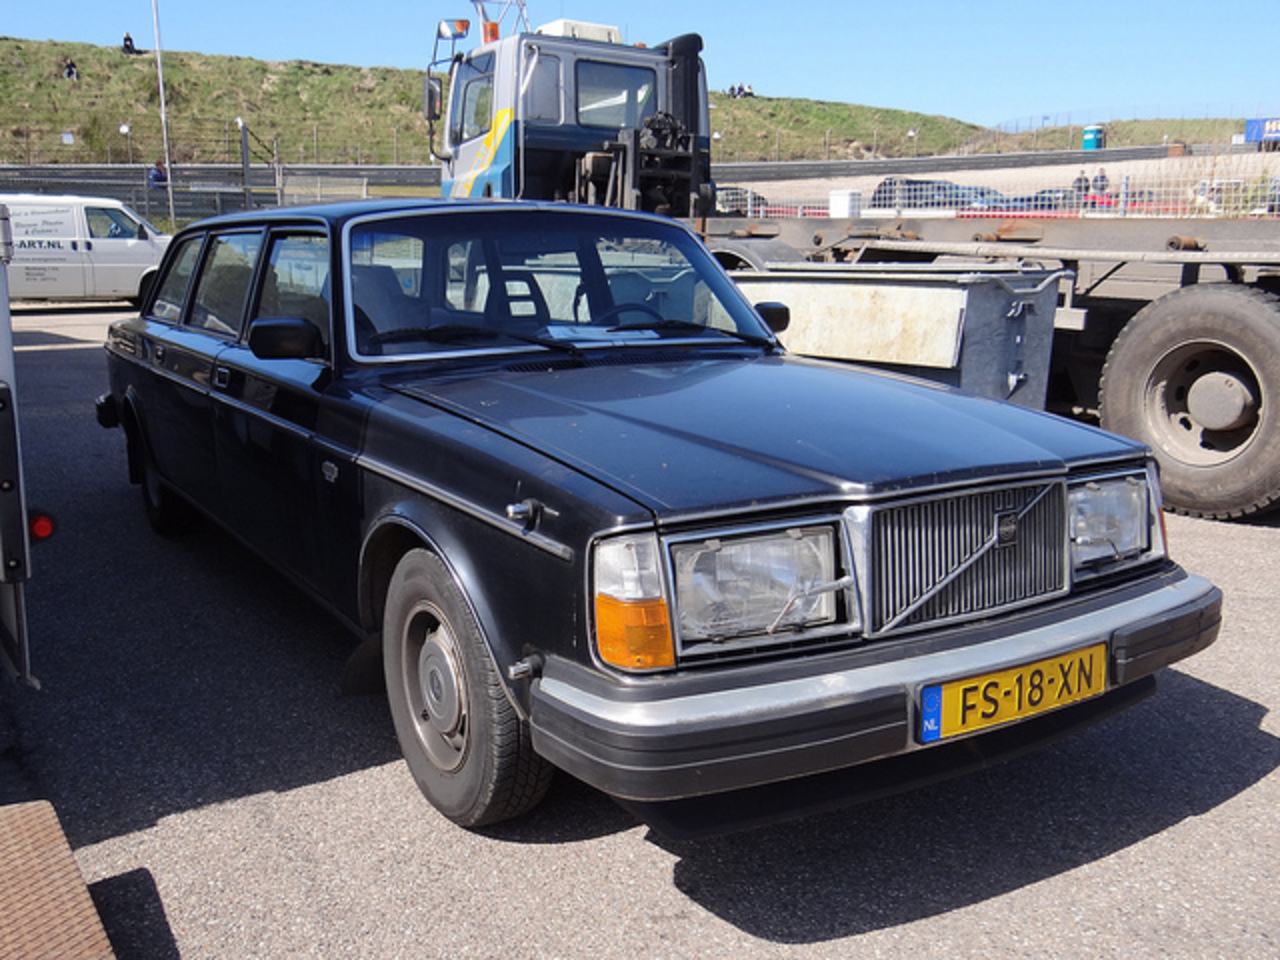 Flickr: The Volvo 262 and any other Volvo 260 series Bertone cars Pool